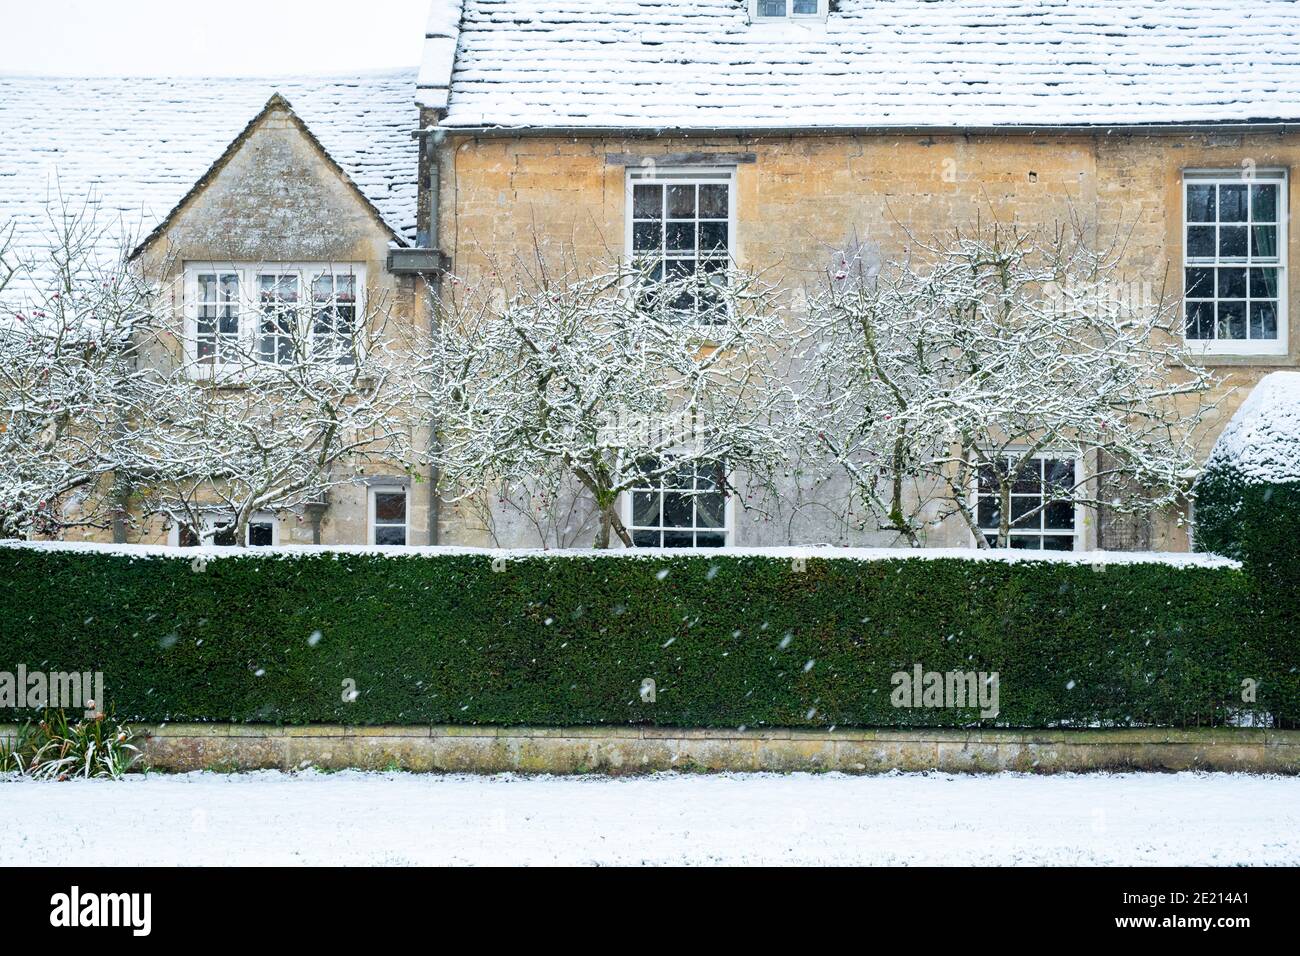 Grand cotswold stone house in the snow at Christmas. Taynton, Cotswolds, Oxfordshire, England Stock Photo